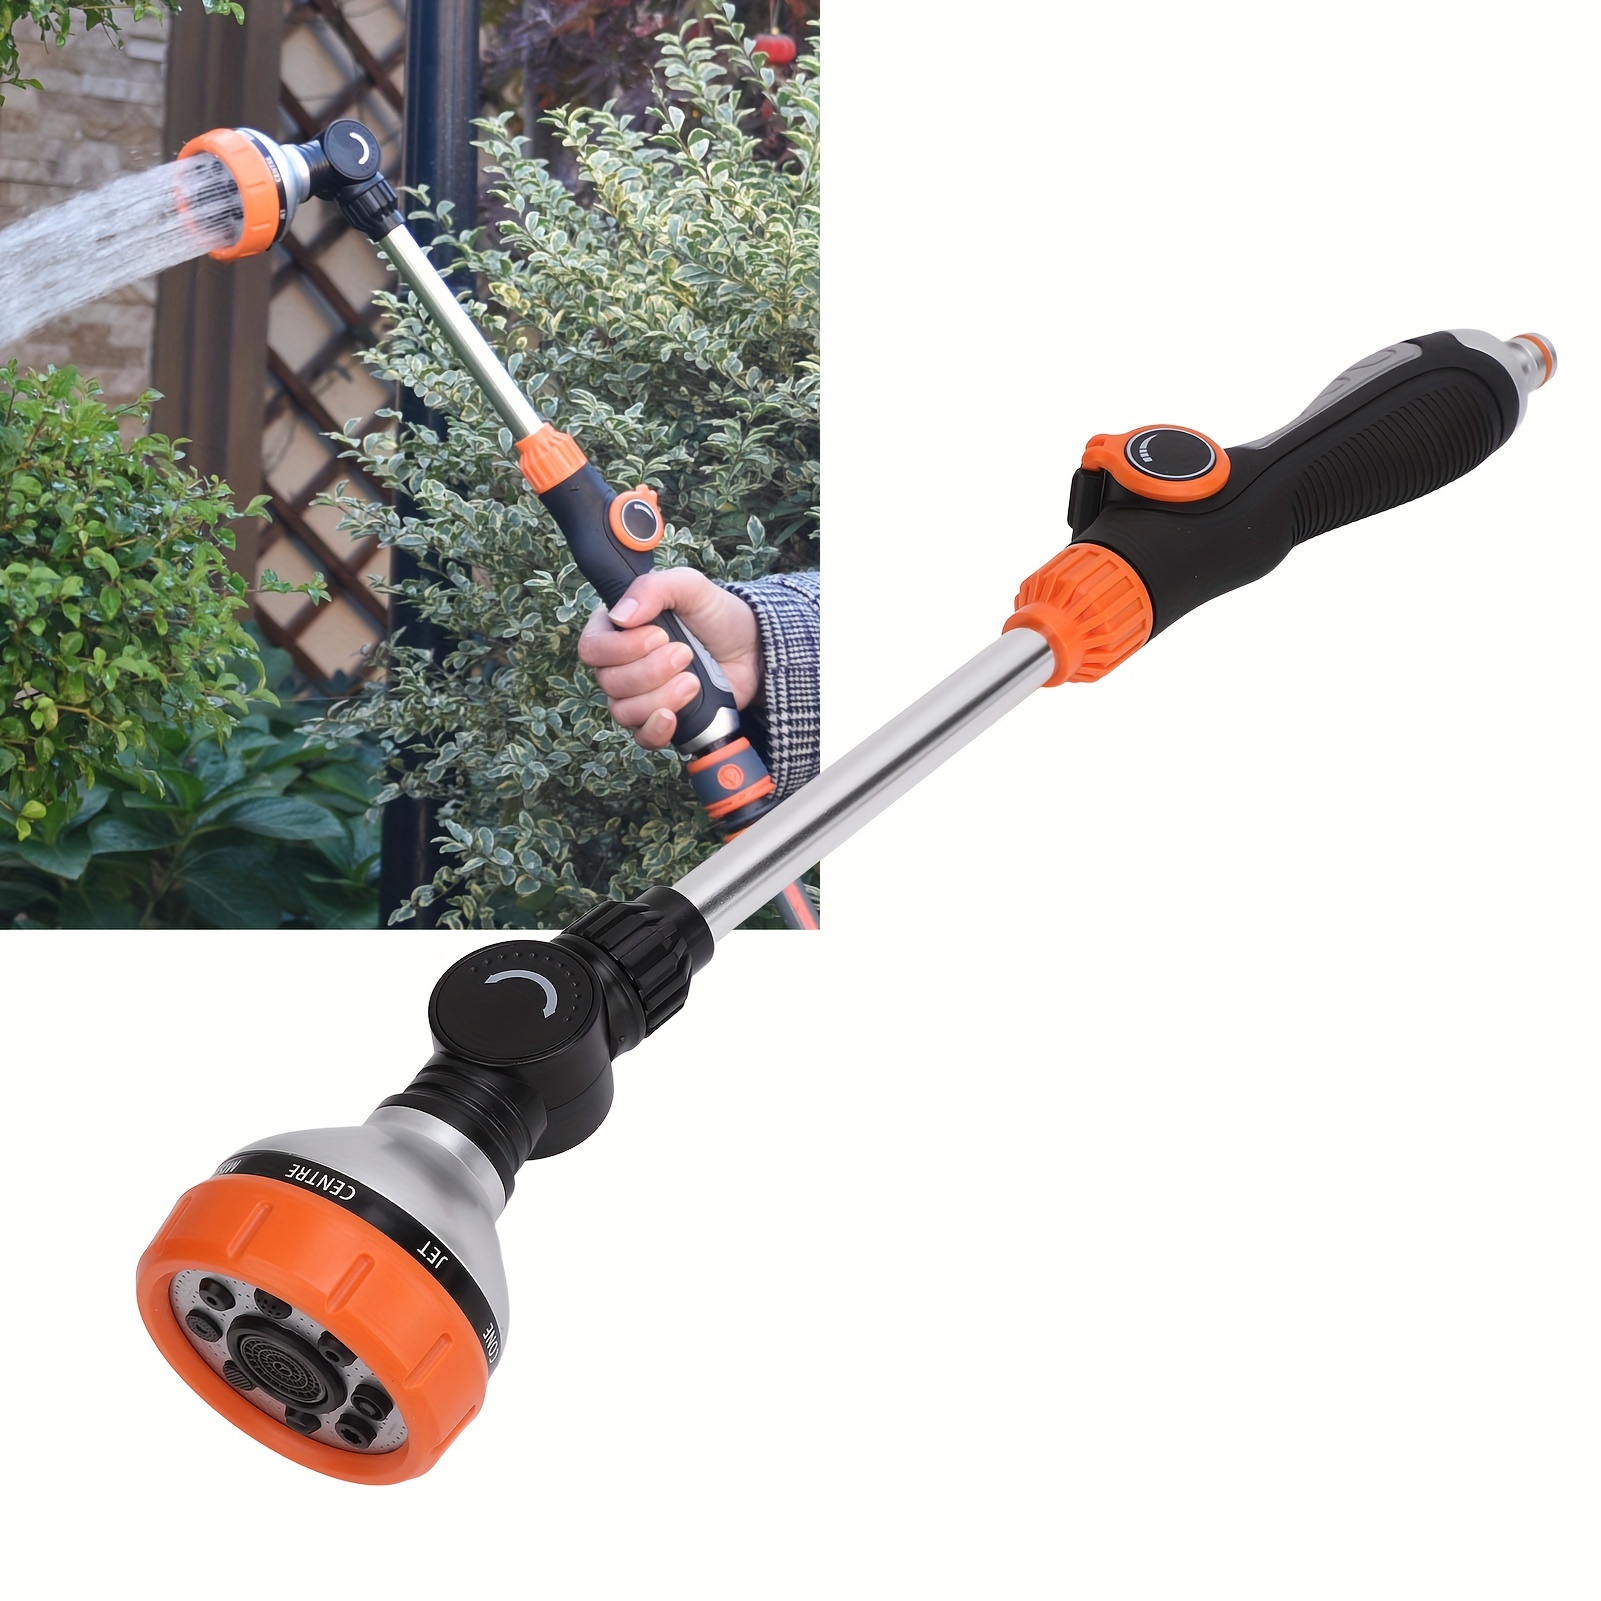 

Versatile Garden Hose Wand With 8 Spray Modes - Lightweight Aluminum Alloy, Ergonomic Grip, Adjustable Angle & Thumb Control For Efficient Watering Of Plants, Flowers & Cars